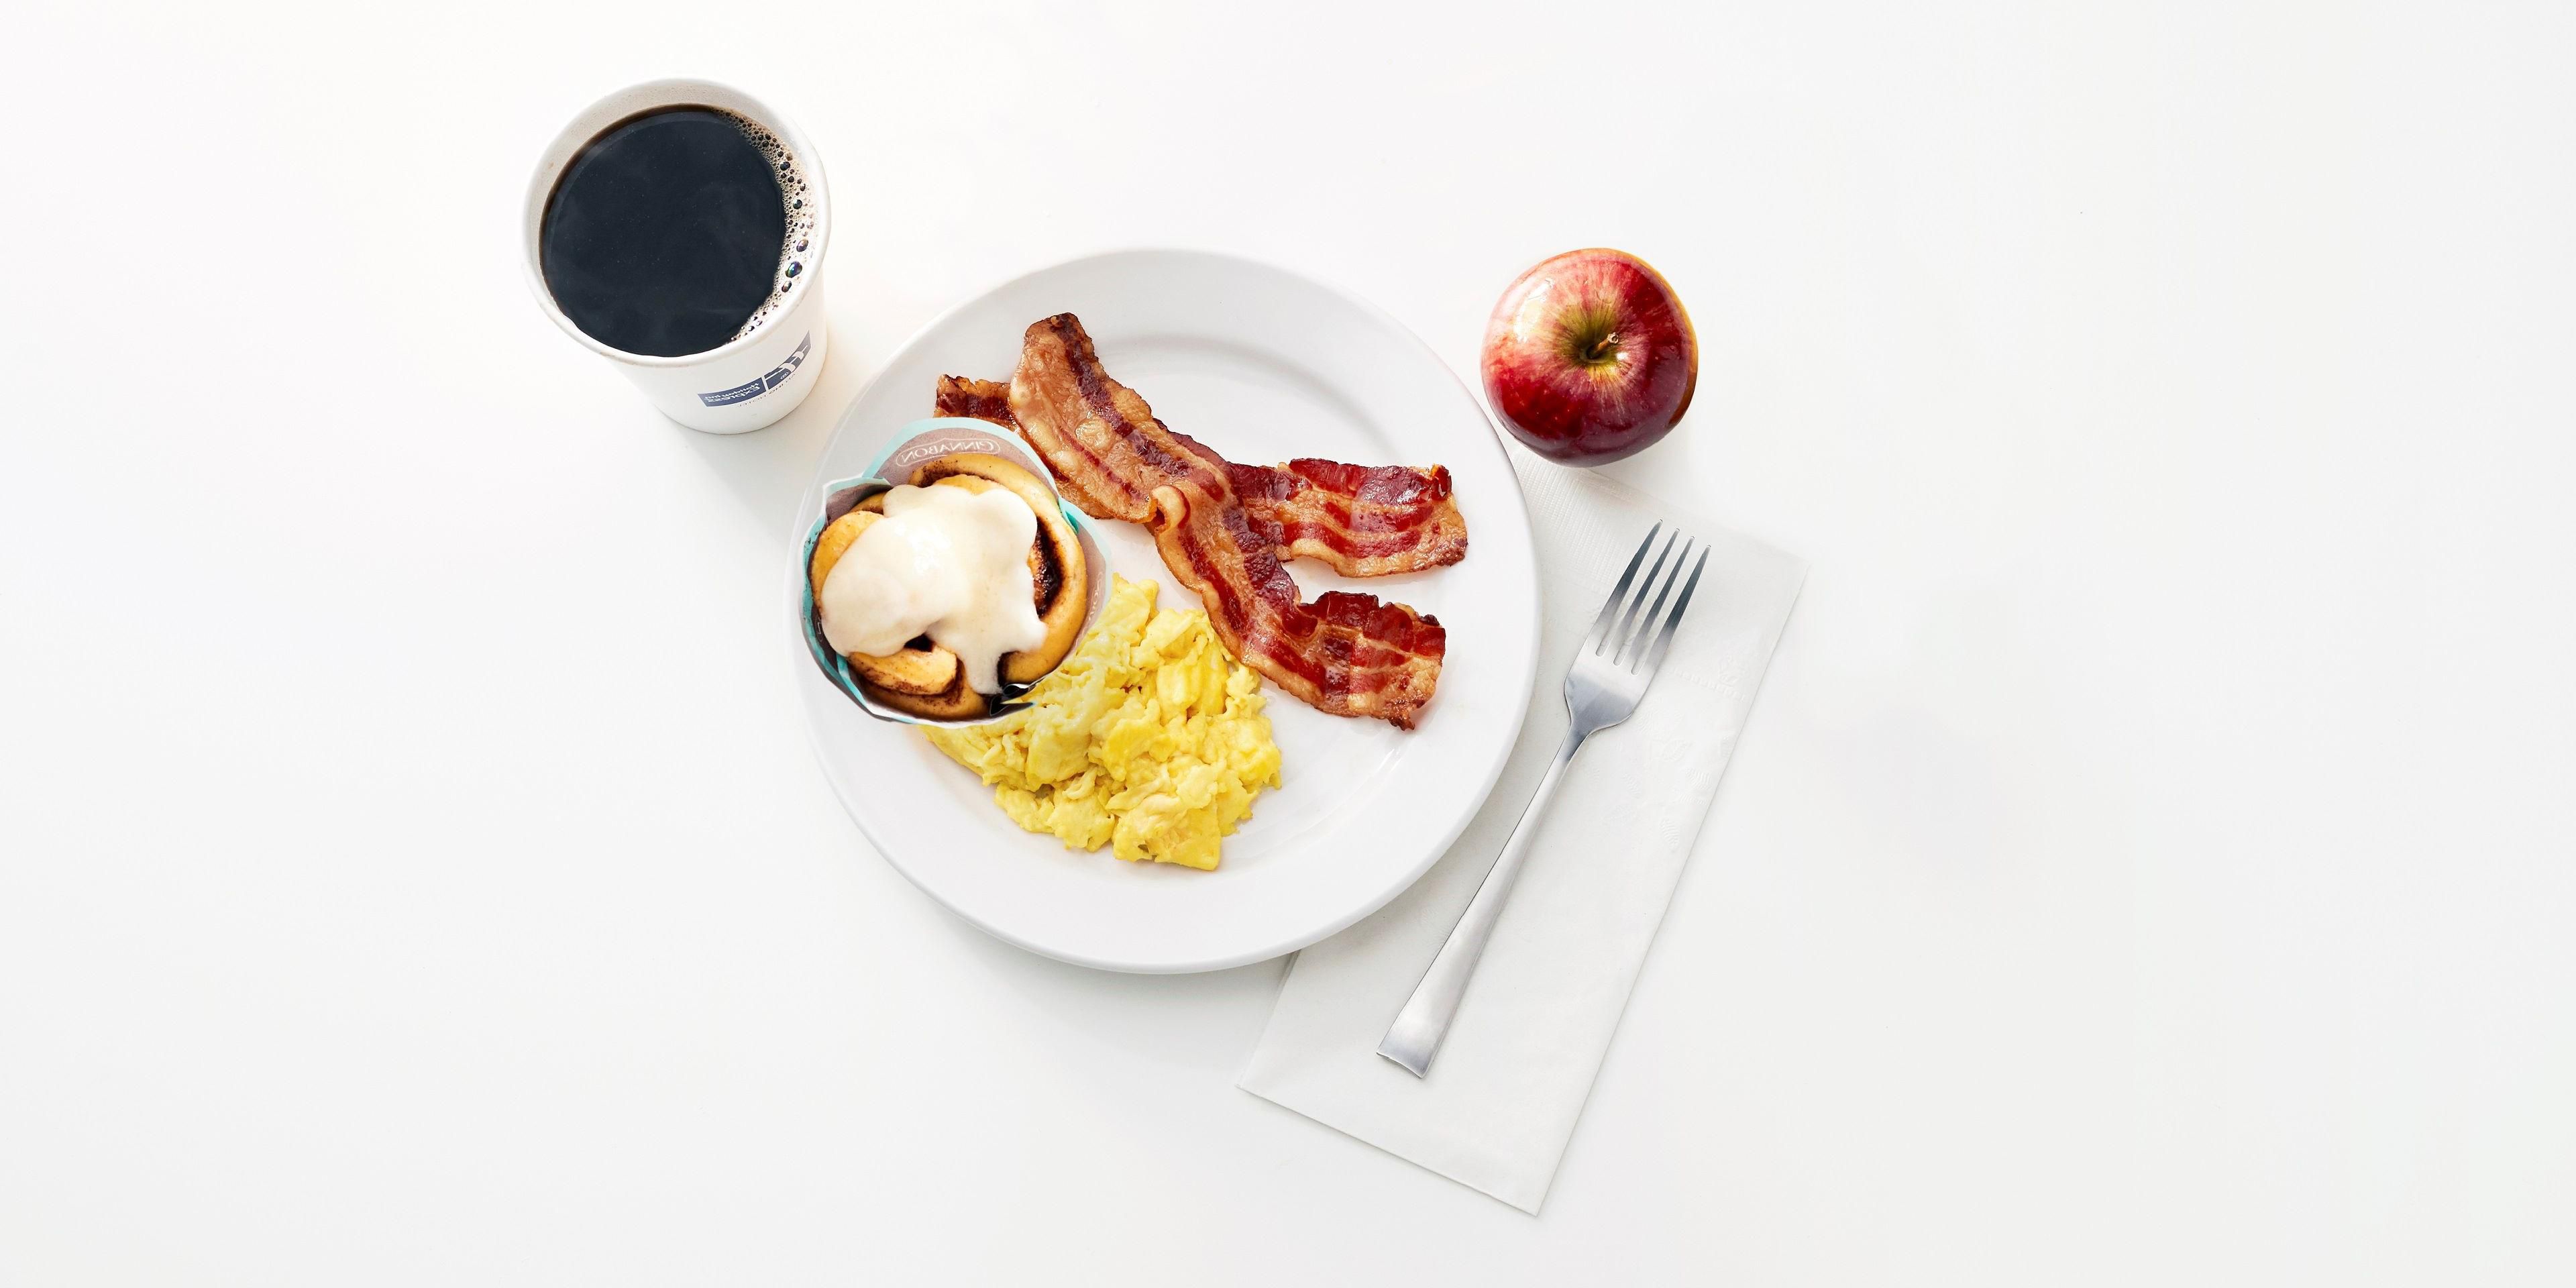 Kick start your day with our free Express Start Breakfast, with grab ‘n’ go options and favorites such as eggs and bacon, hot pancakes, our signature cinnamon rolls and fresh coffee. Offered Monday to Friday from 6:30AM to 9:30AM and Saturday to Sunday from 6:30AM to 10:30AM .